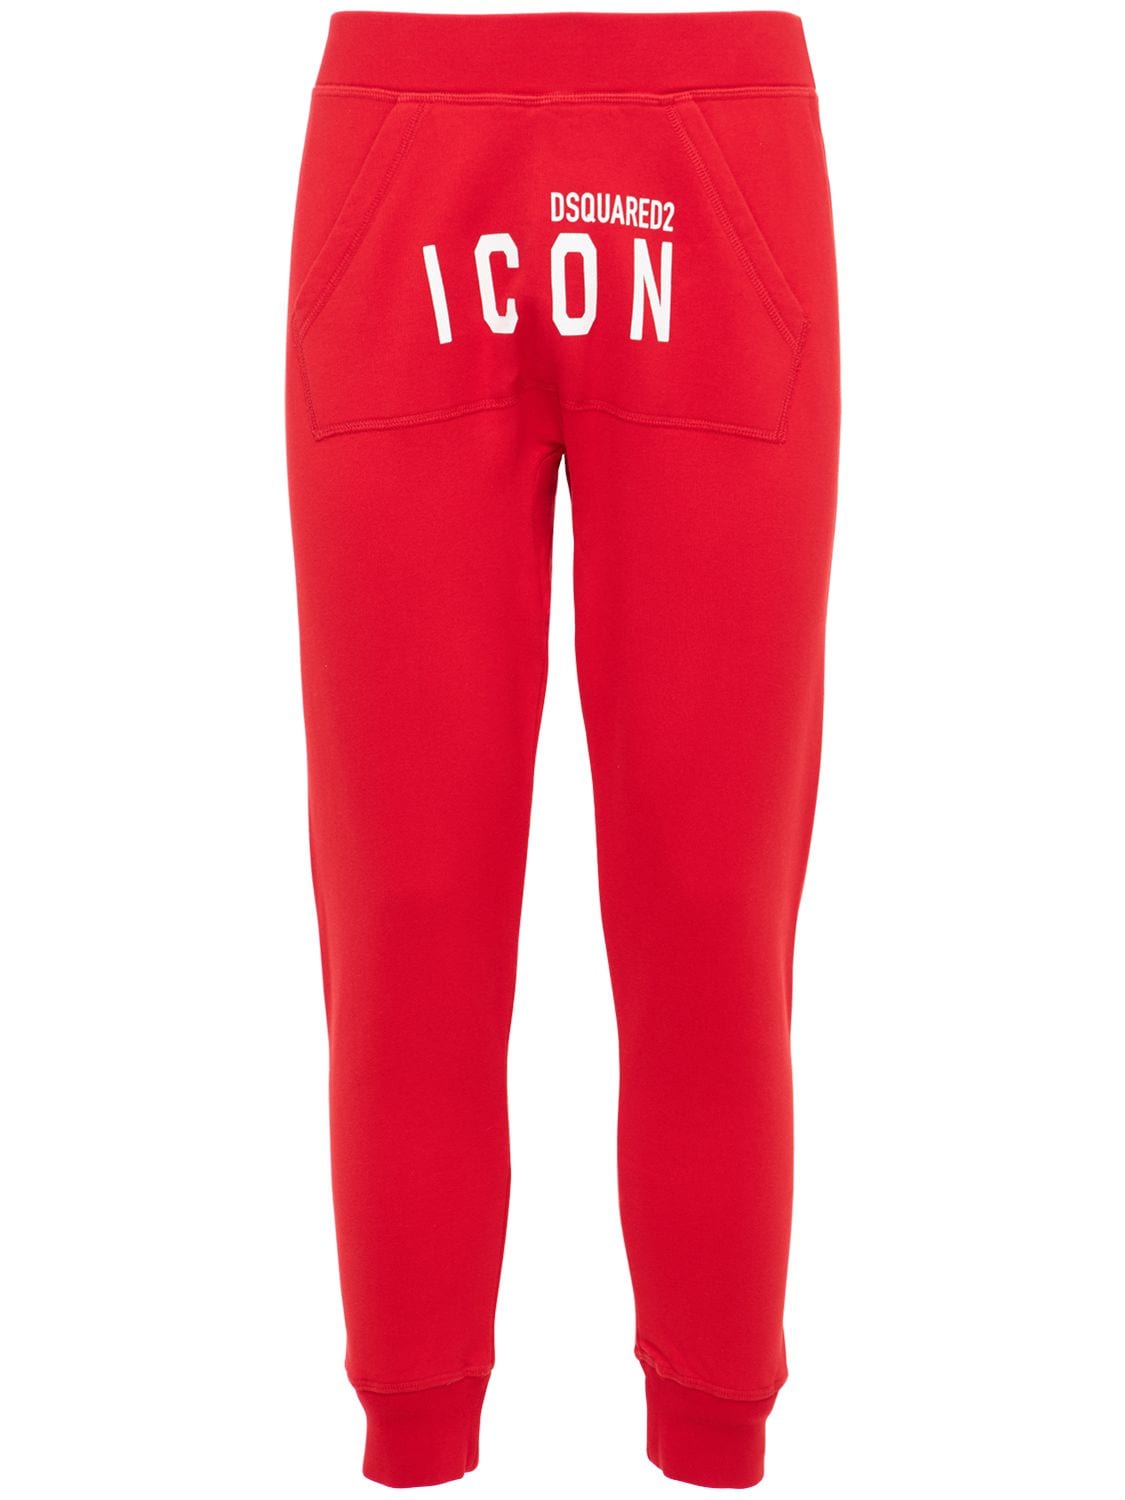 DSQUARED2 PRINT ICON LOGO COTTON JERSEY SWEATtrousers,71IS3C005-MZEY0